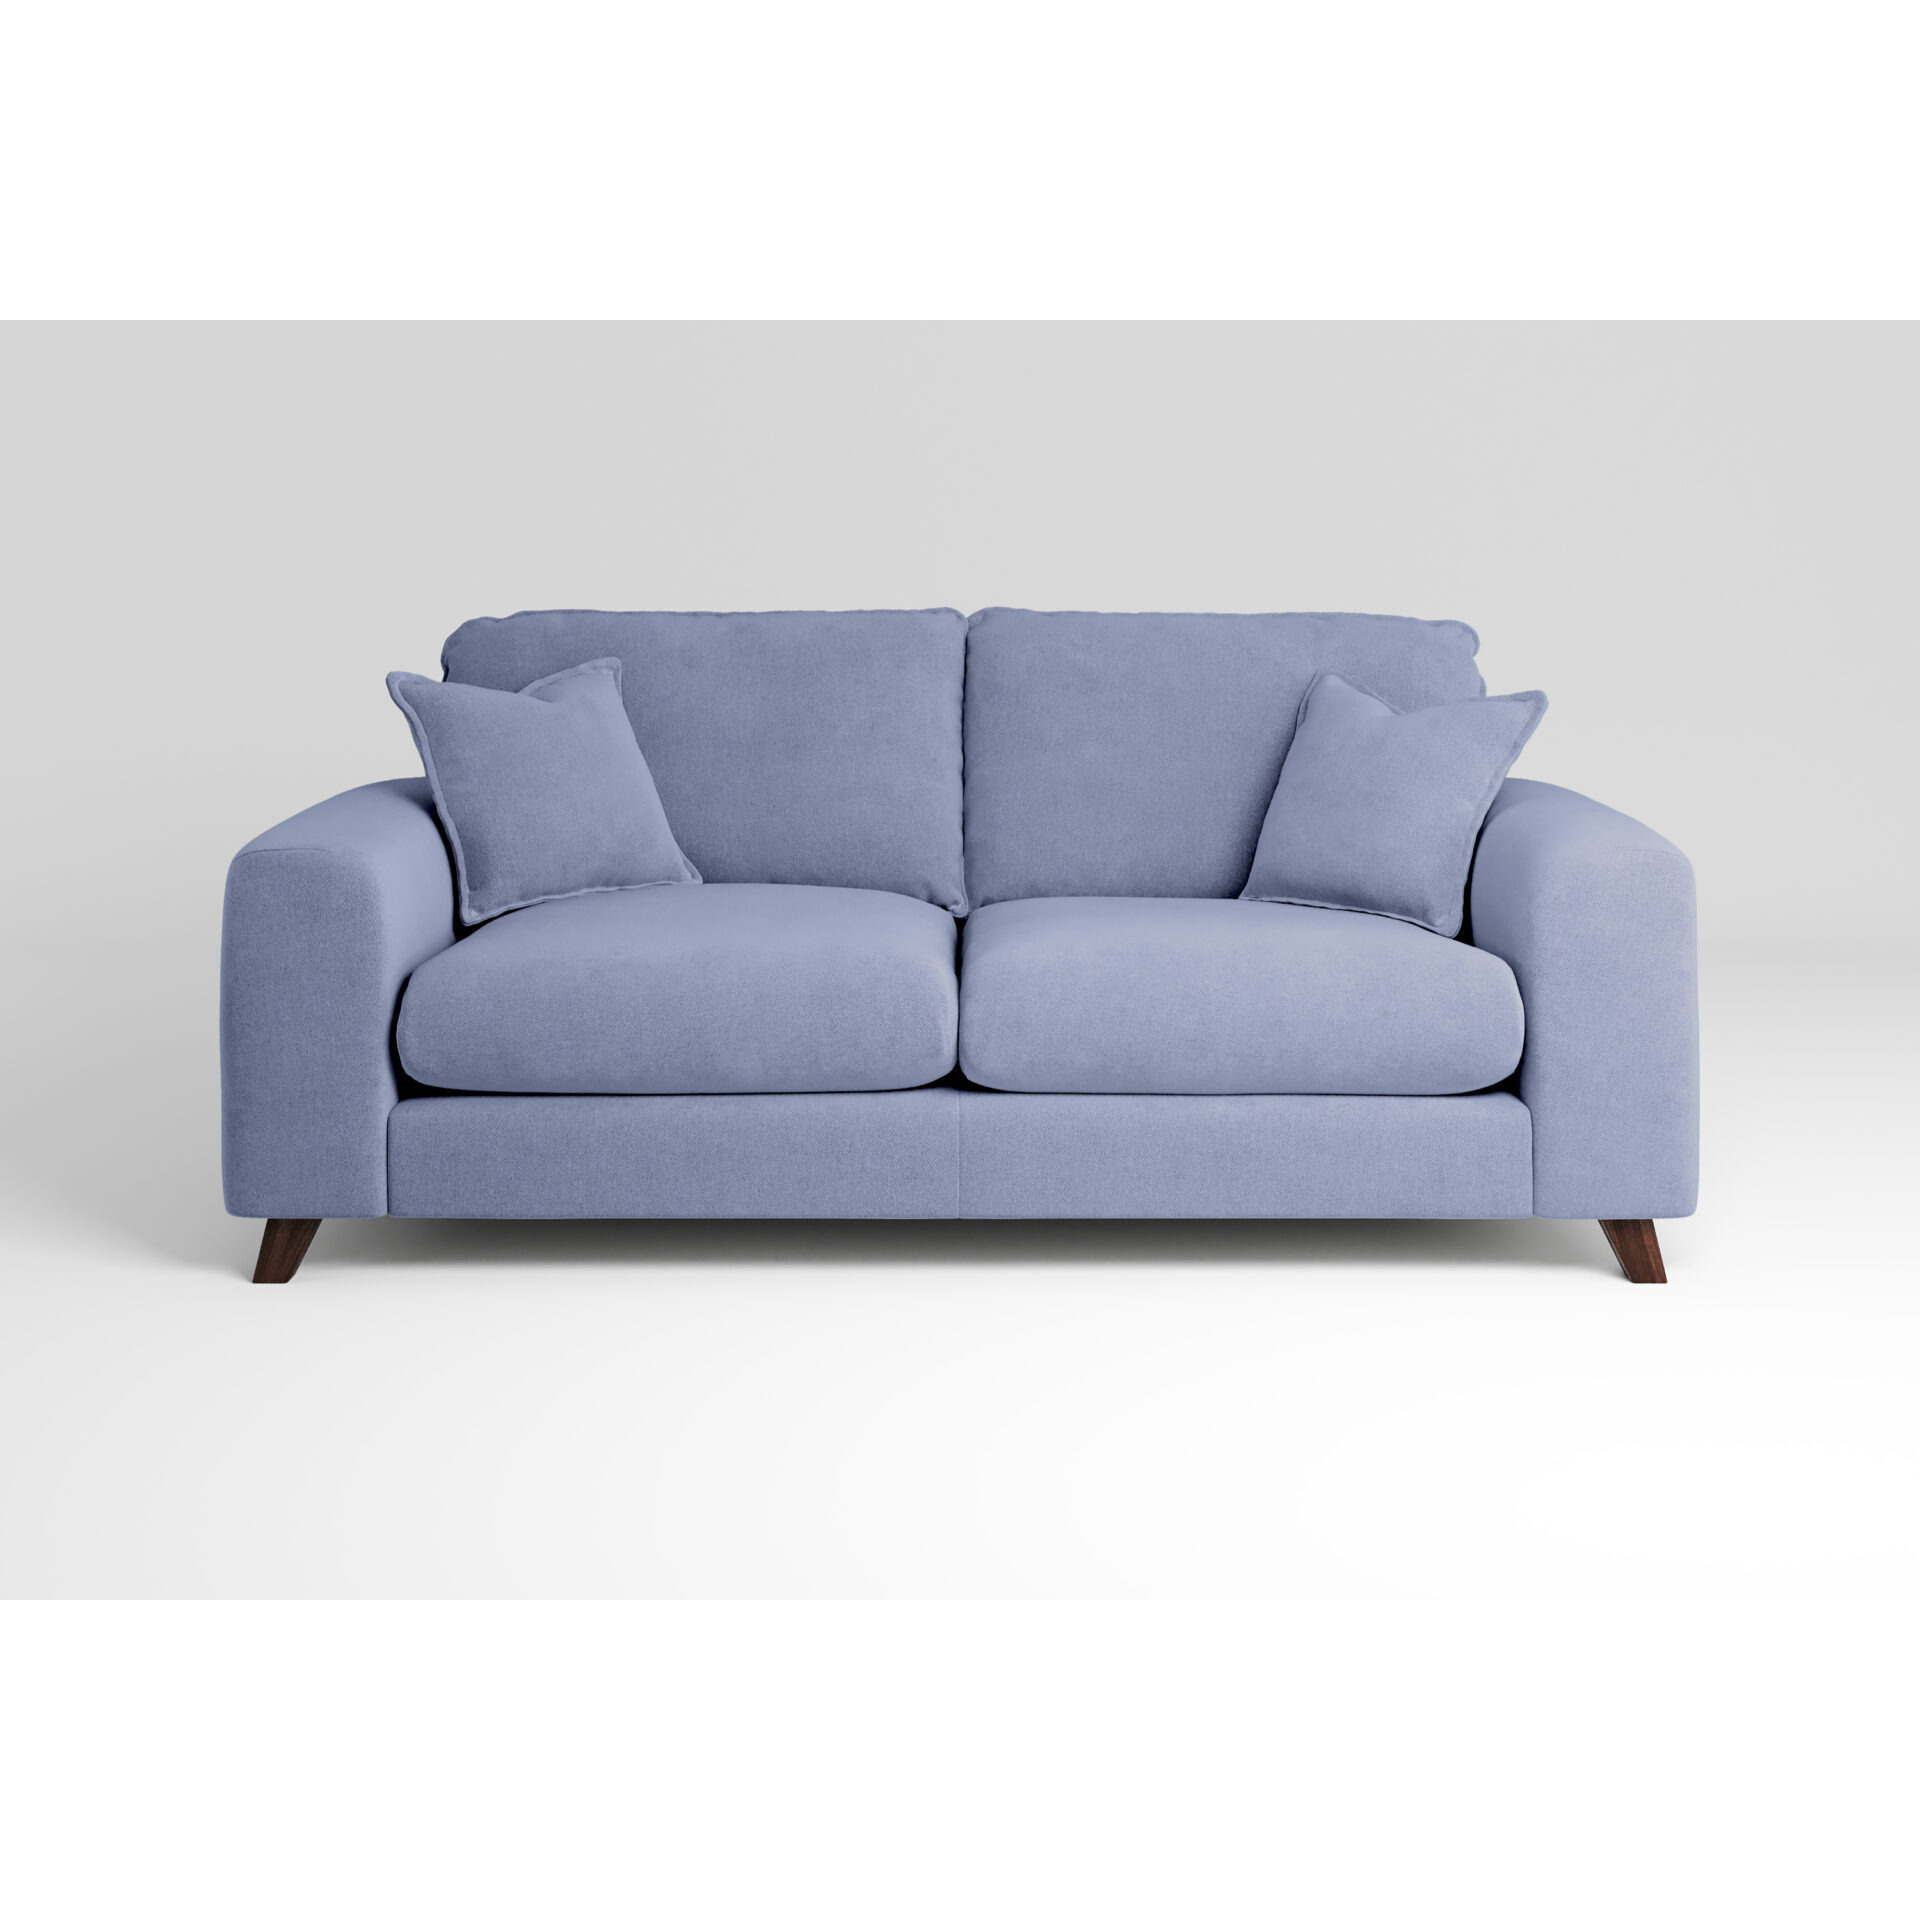 Serenity - 3 Seater Sofa in Brushed Wool Feel Denim | Comfortable and Stylish